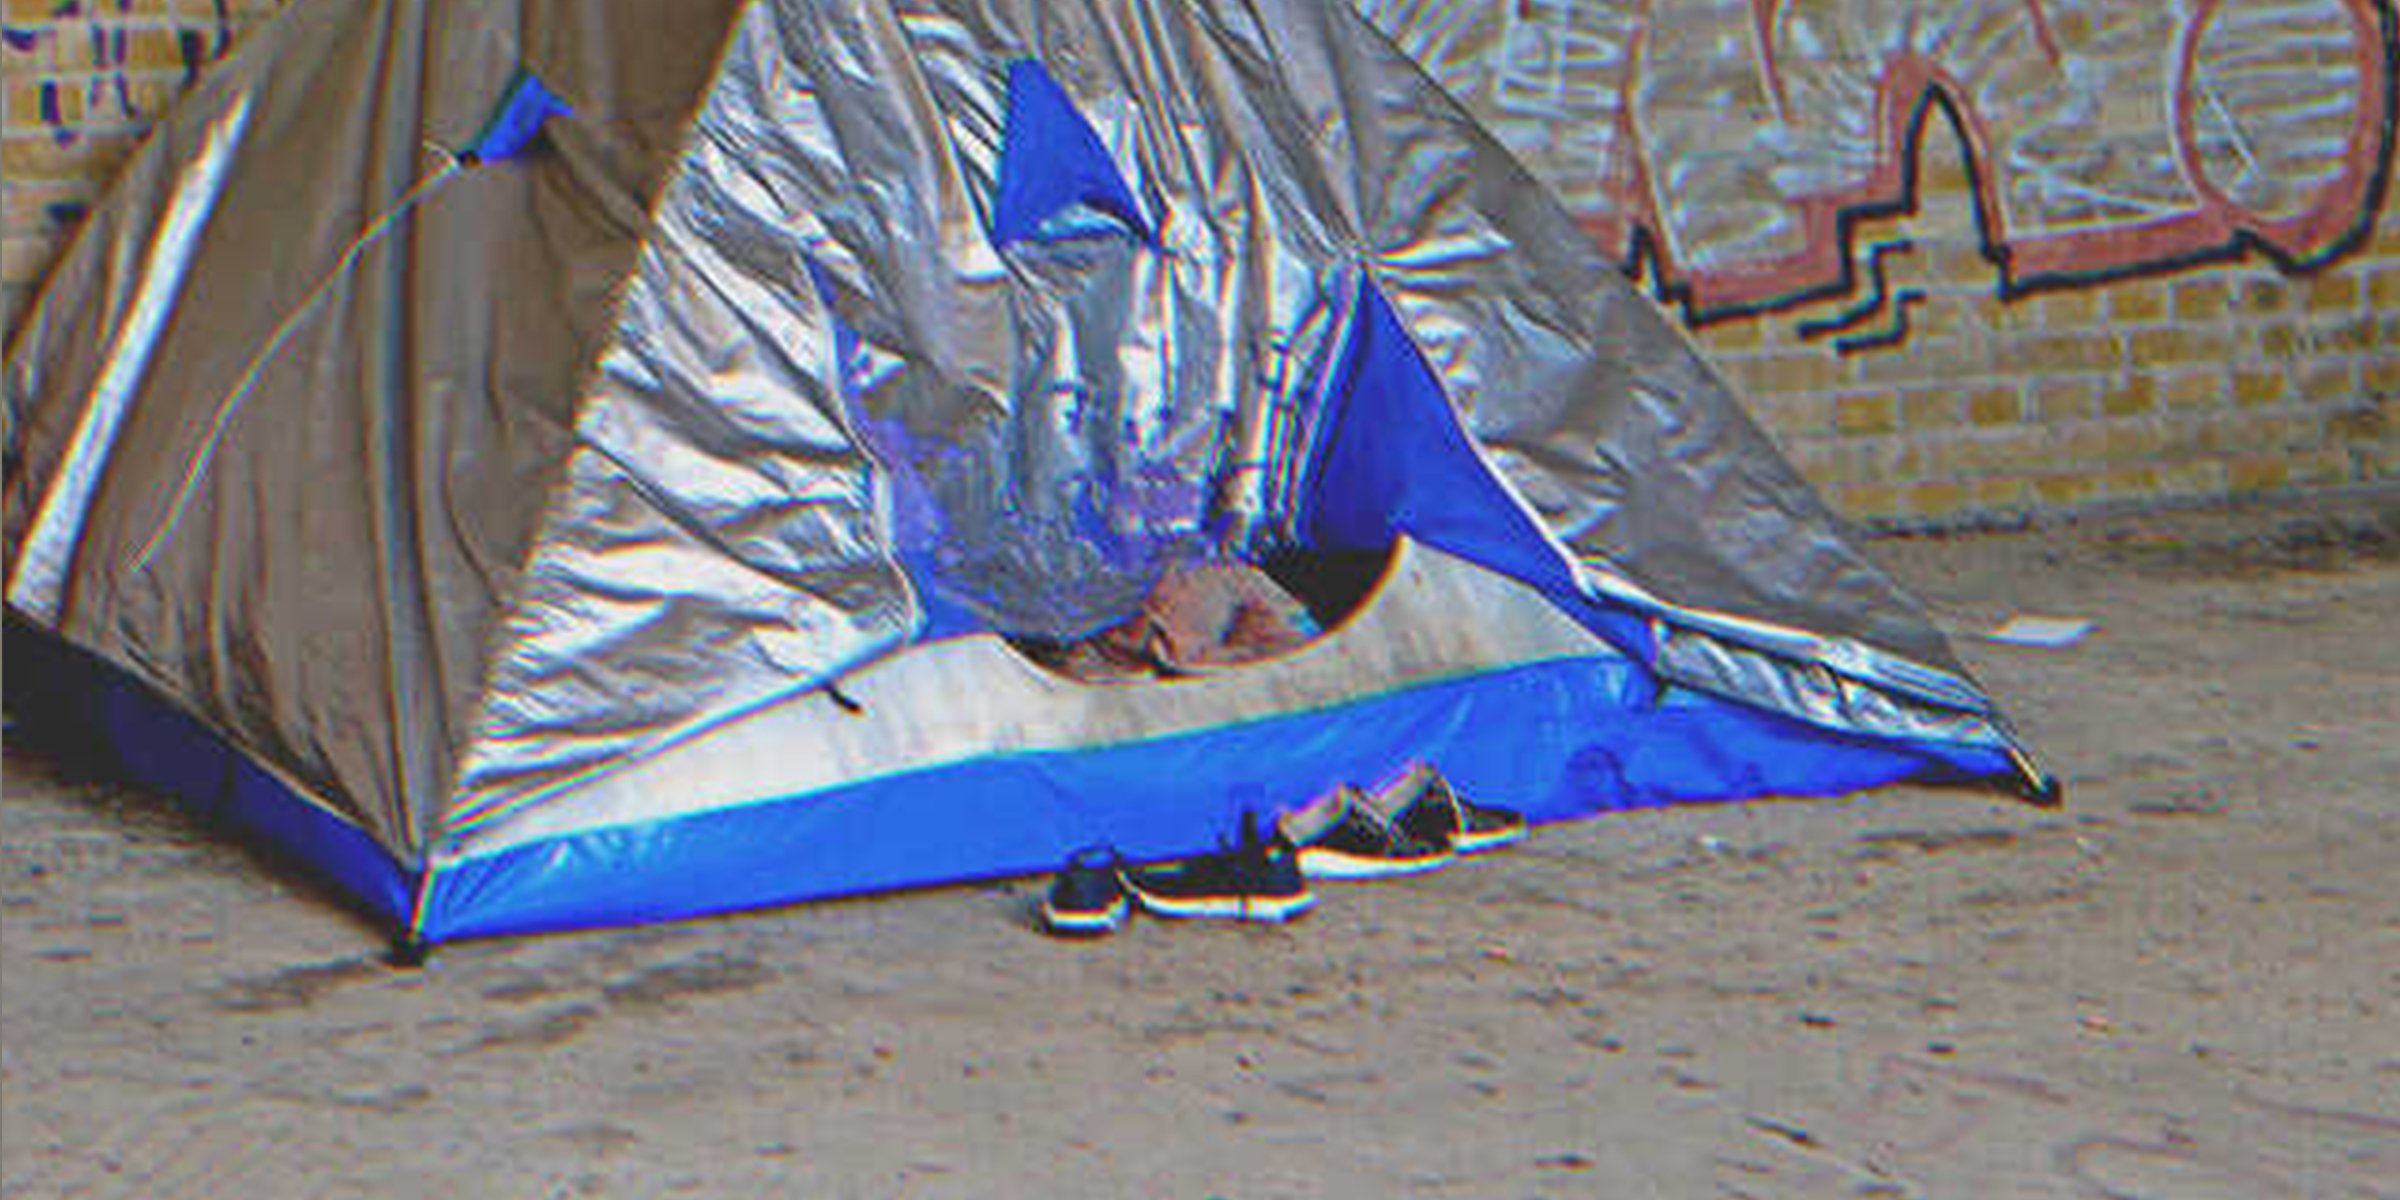 Shoes outisde a tent. | Shutterstock